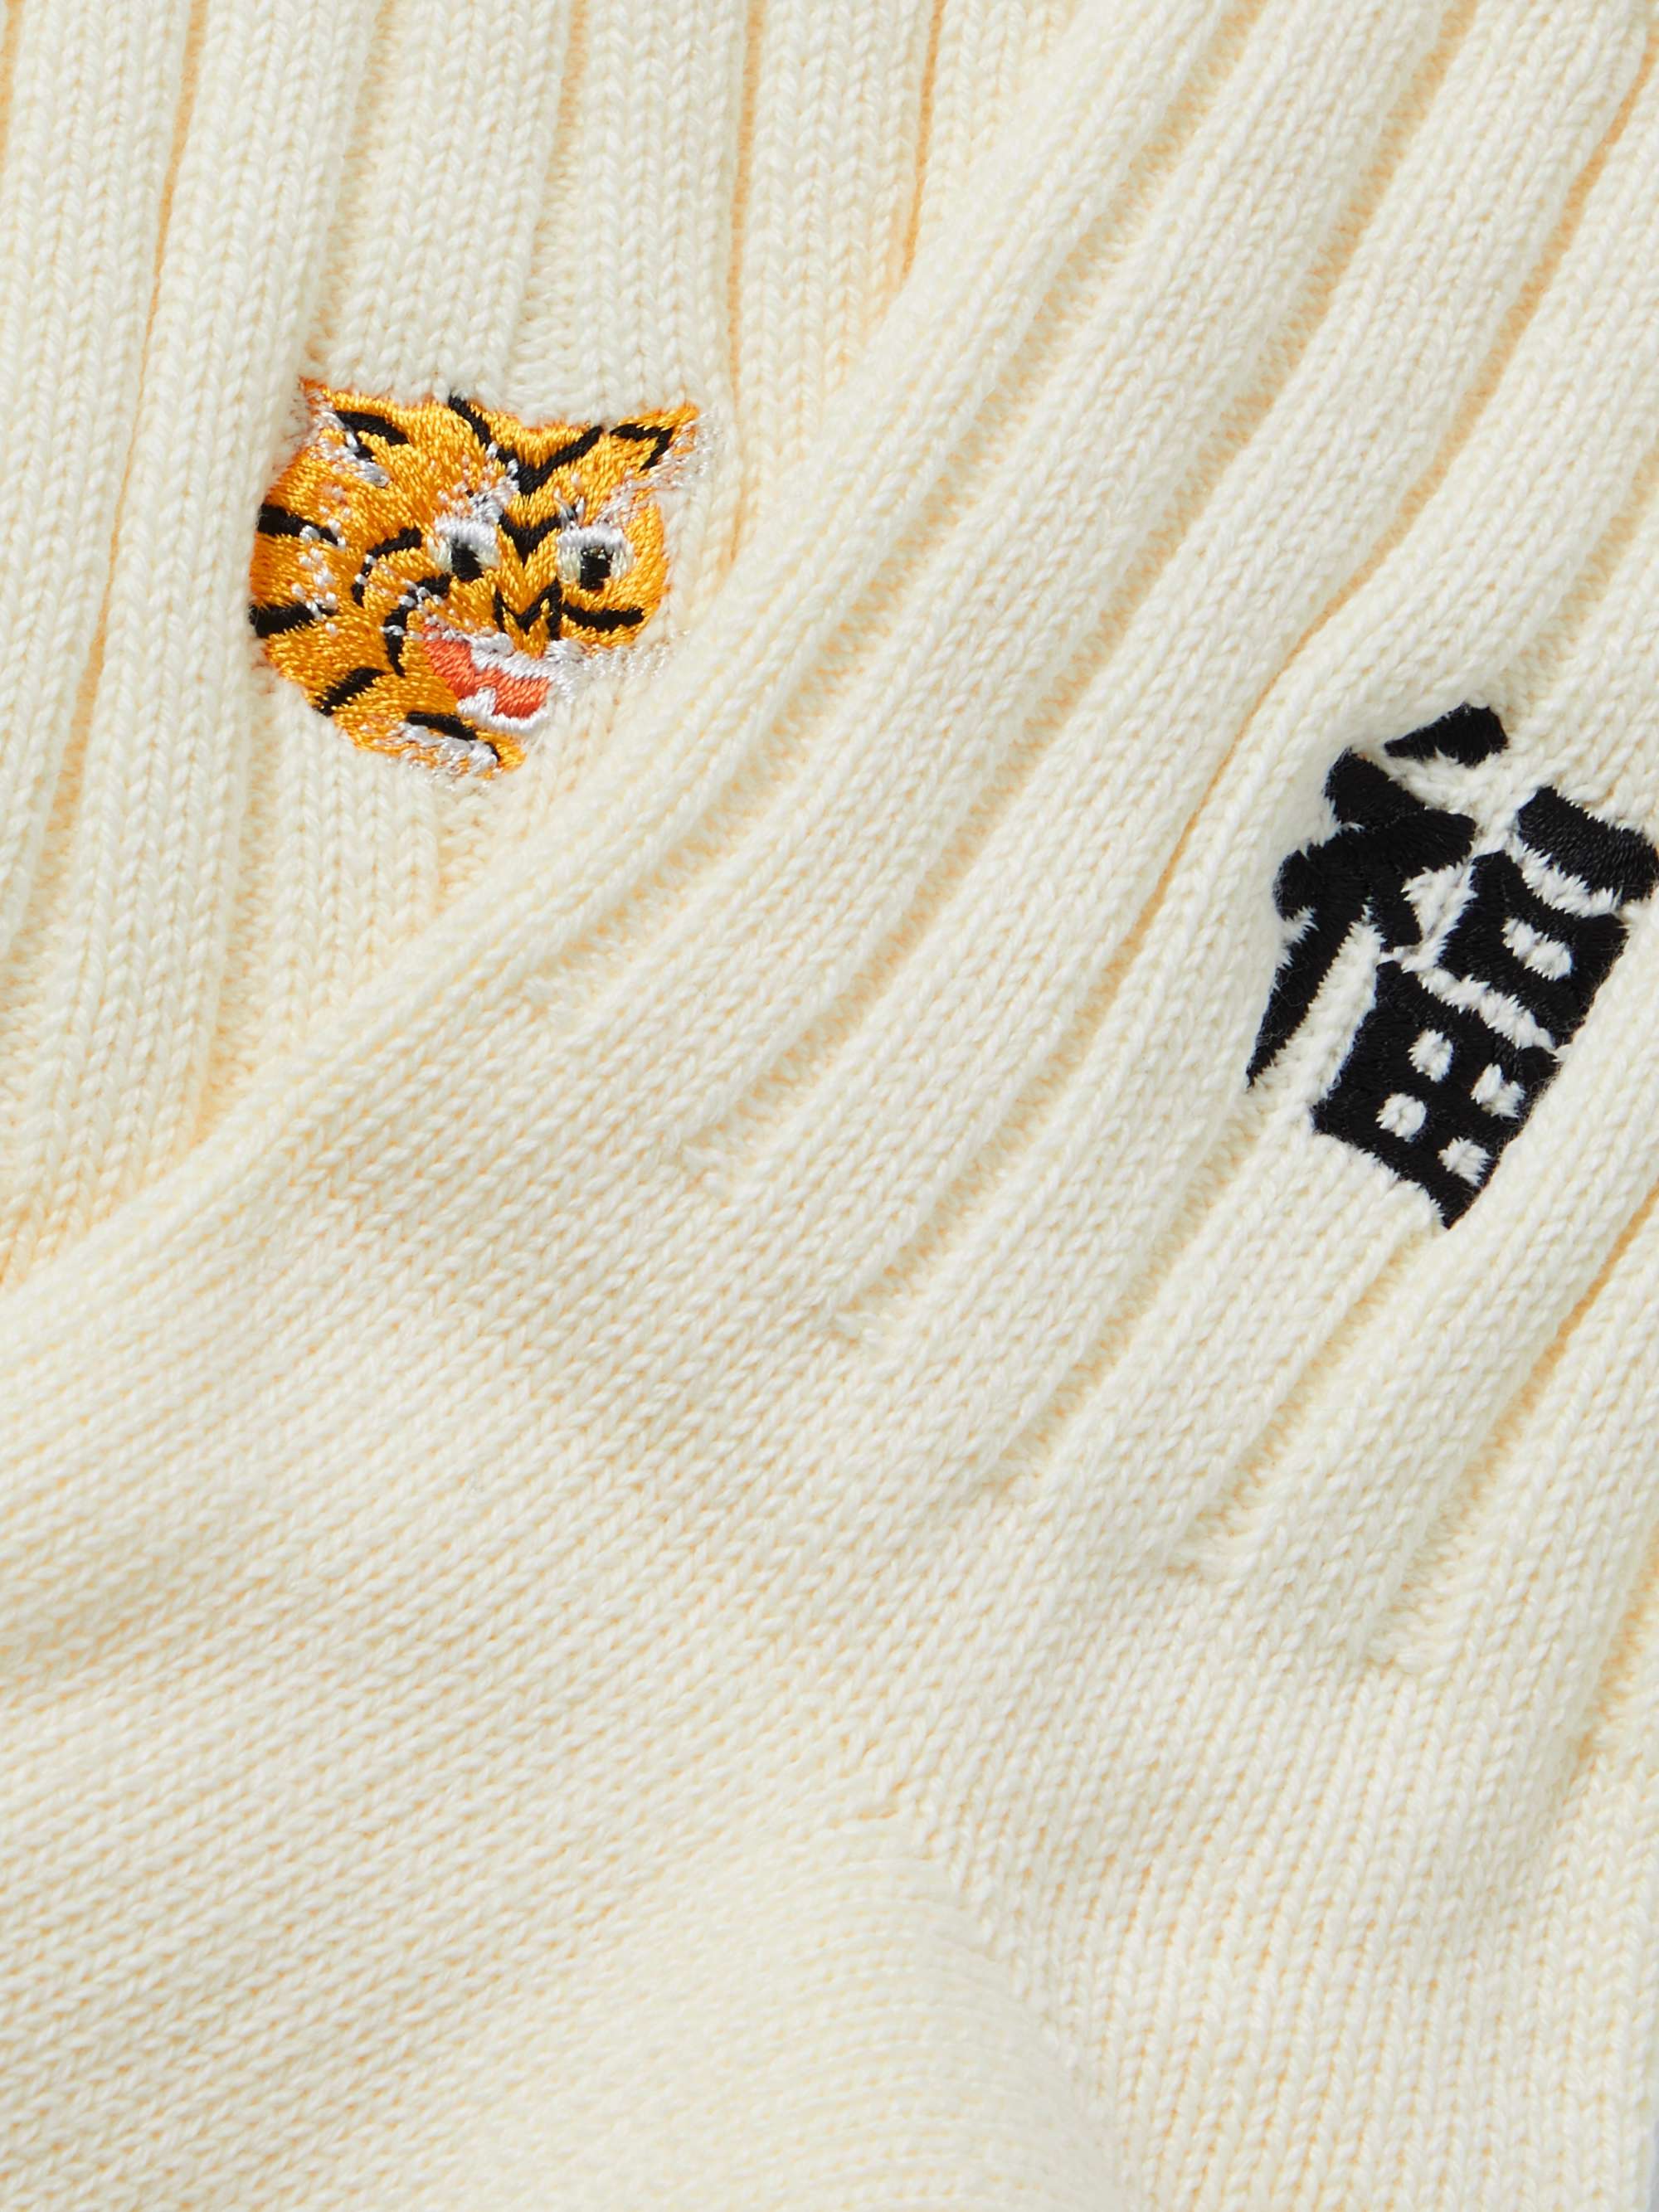 ROSTERSOX Tiger Embroidered Ribbed Cotton-Blend Socks